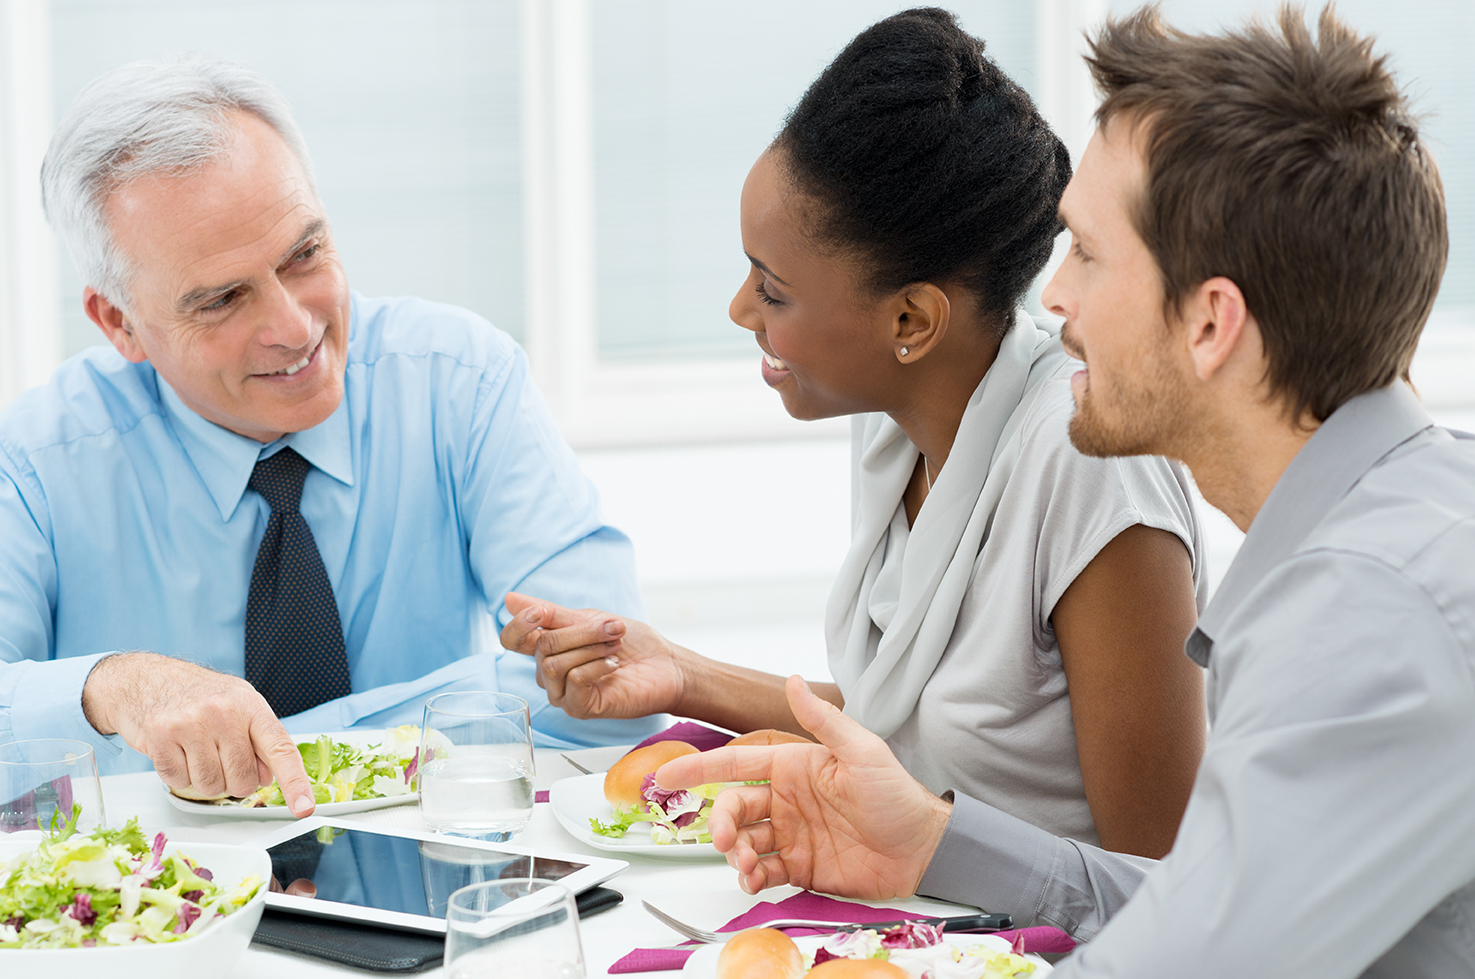 bigstock-Business-Colleagues-Eating-Mea-46401748